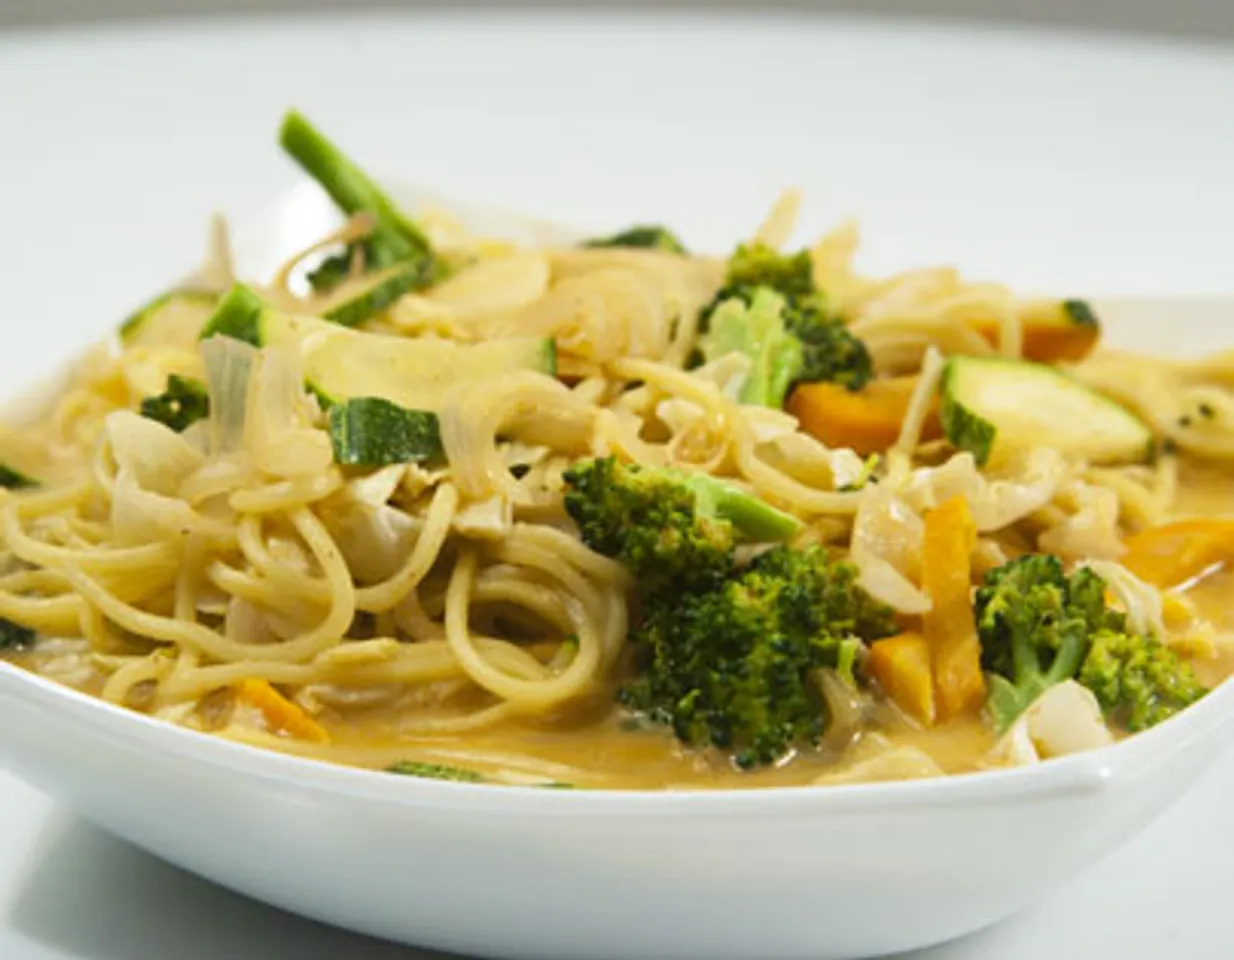 Noodles And Vegetables In Coconut Sauce